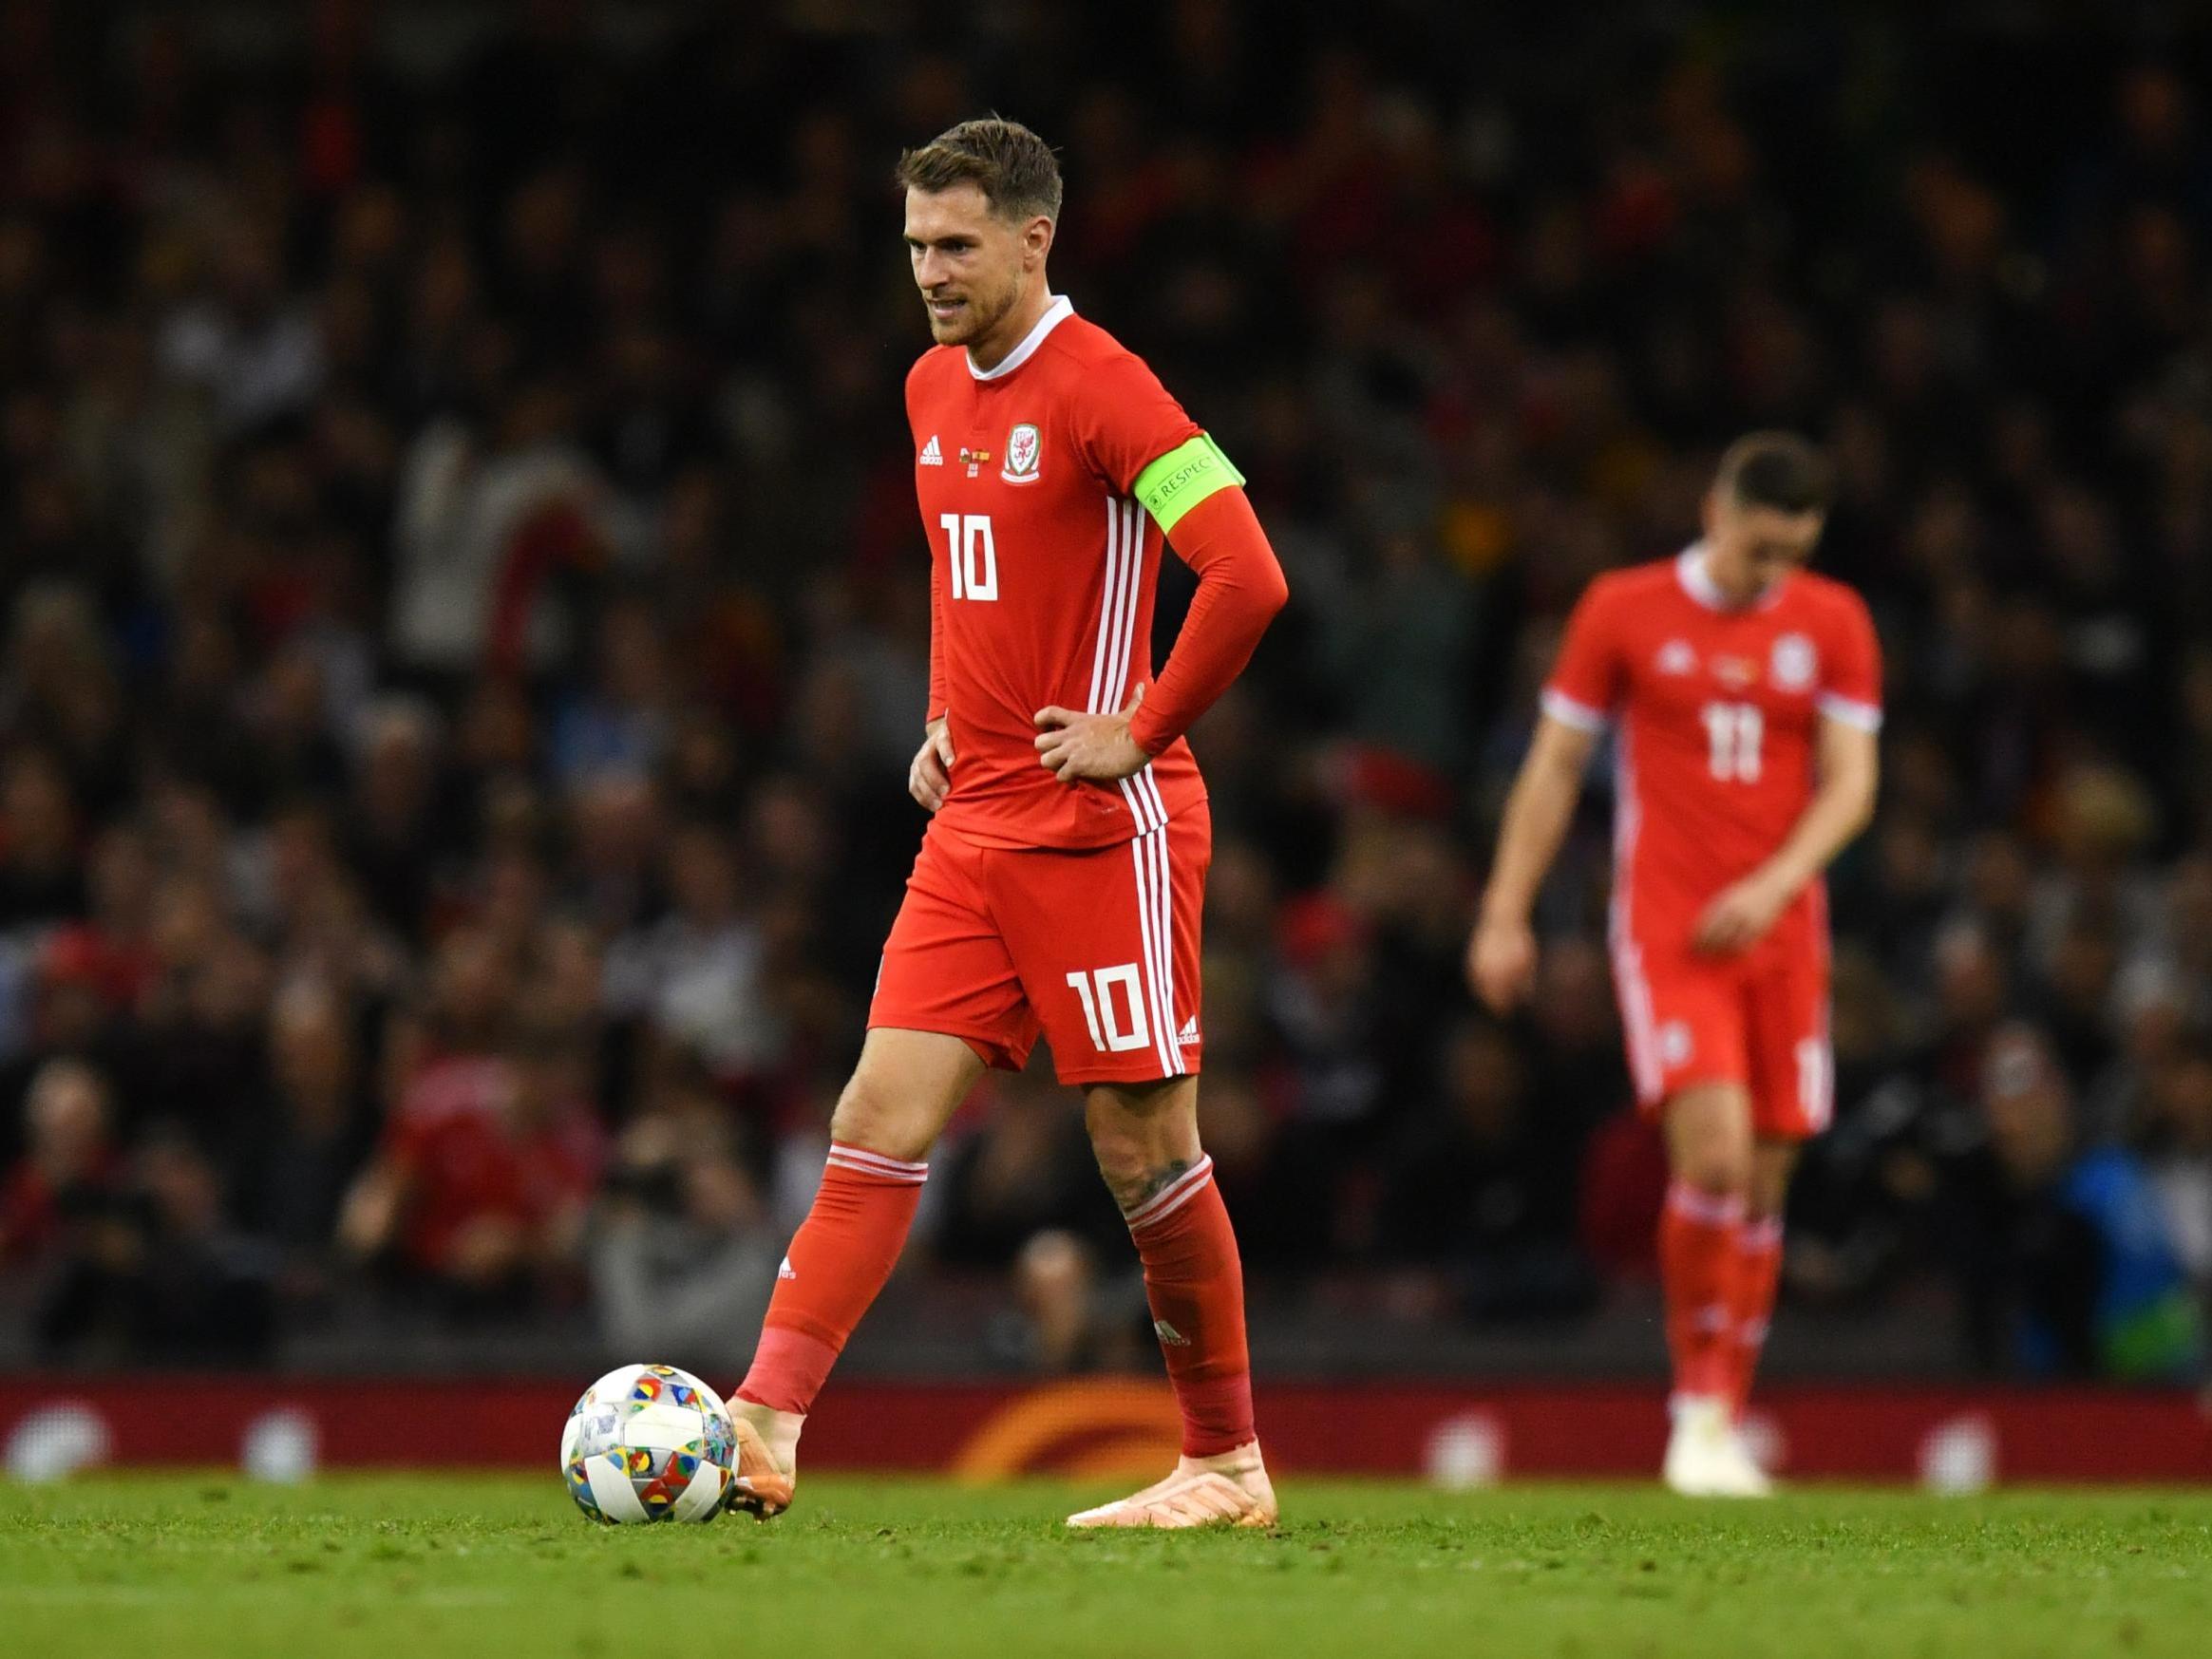 Aaron Ramsey won't be playing against Ireland